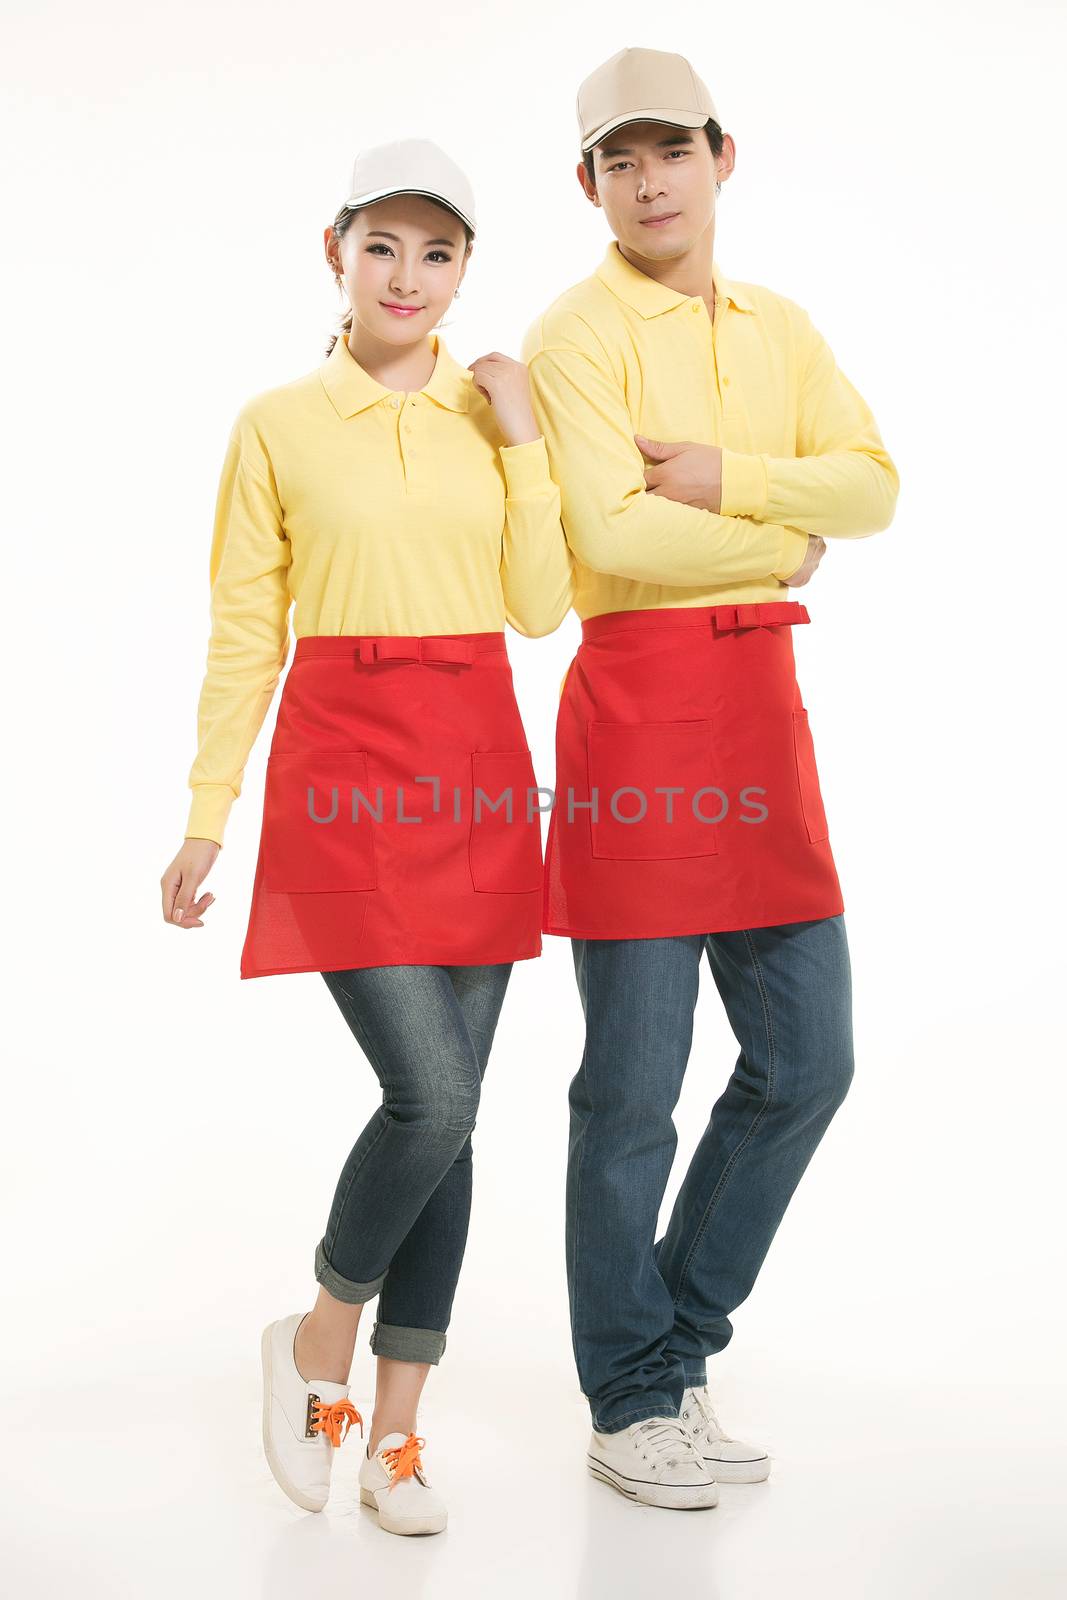 Wear all kinds of T-shirts waiter standing in white background